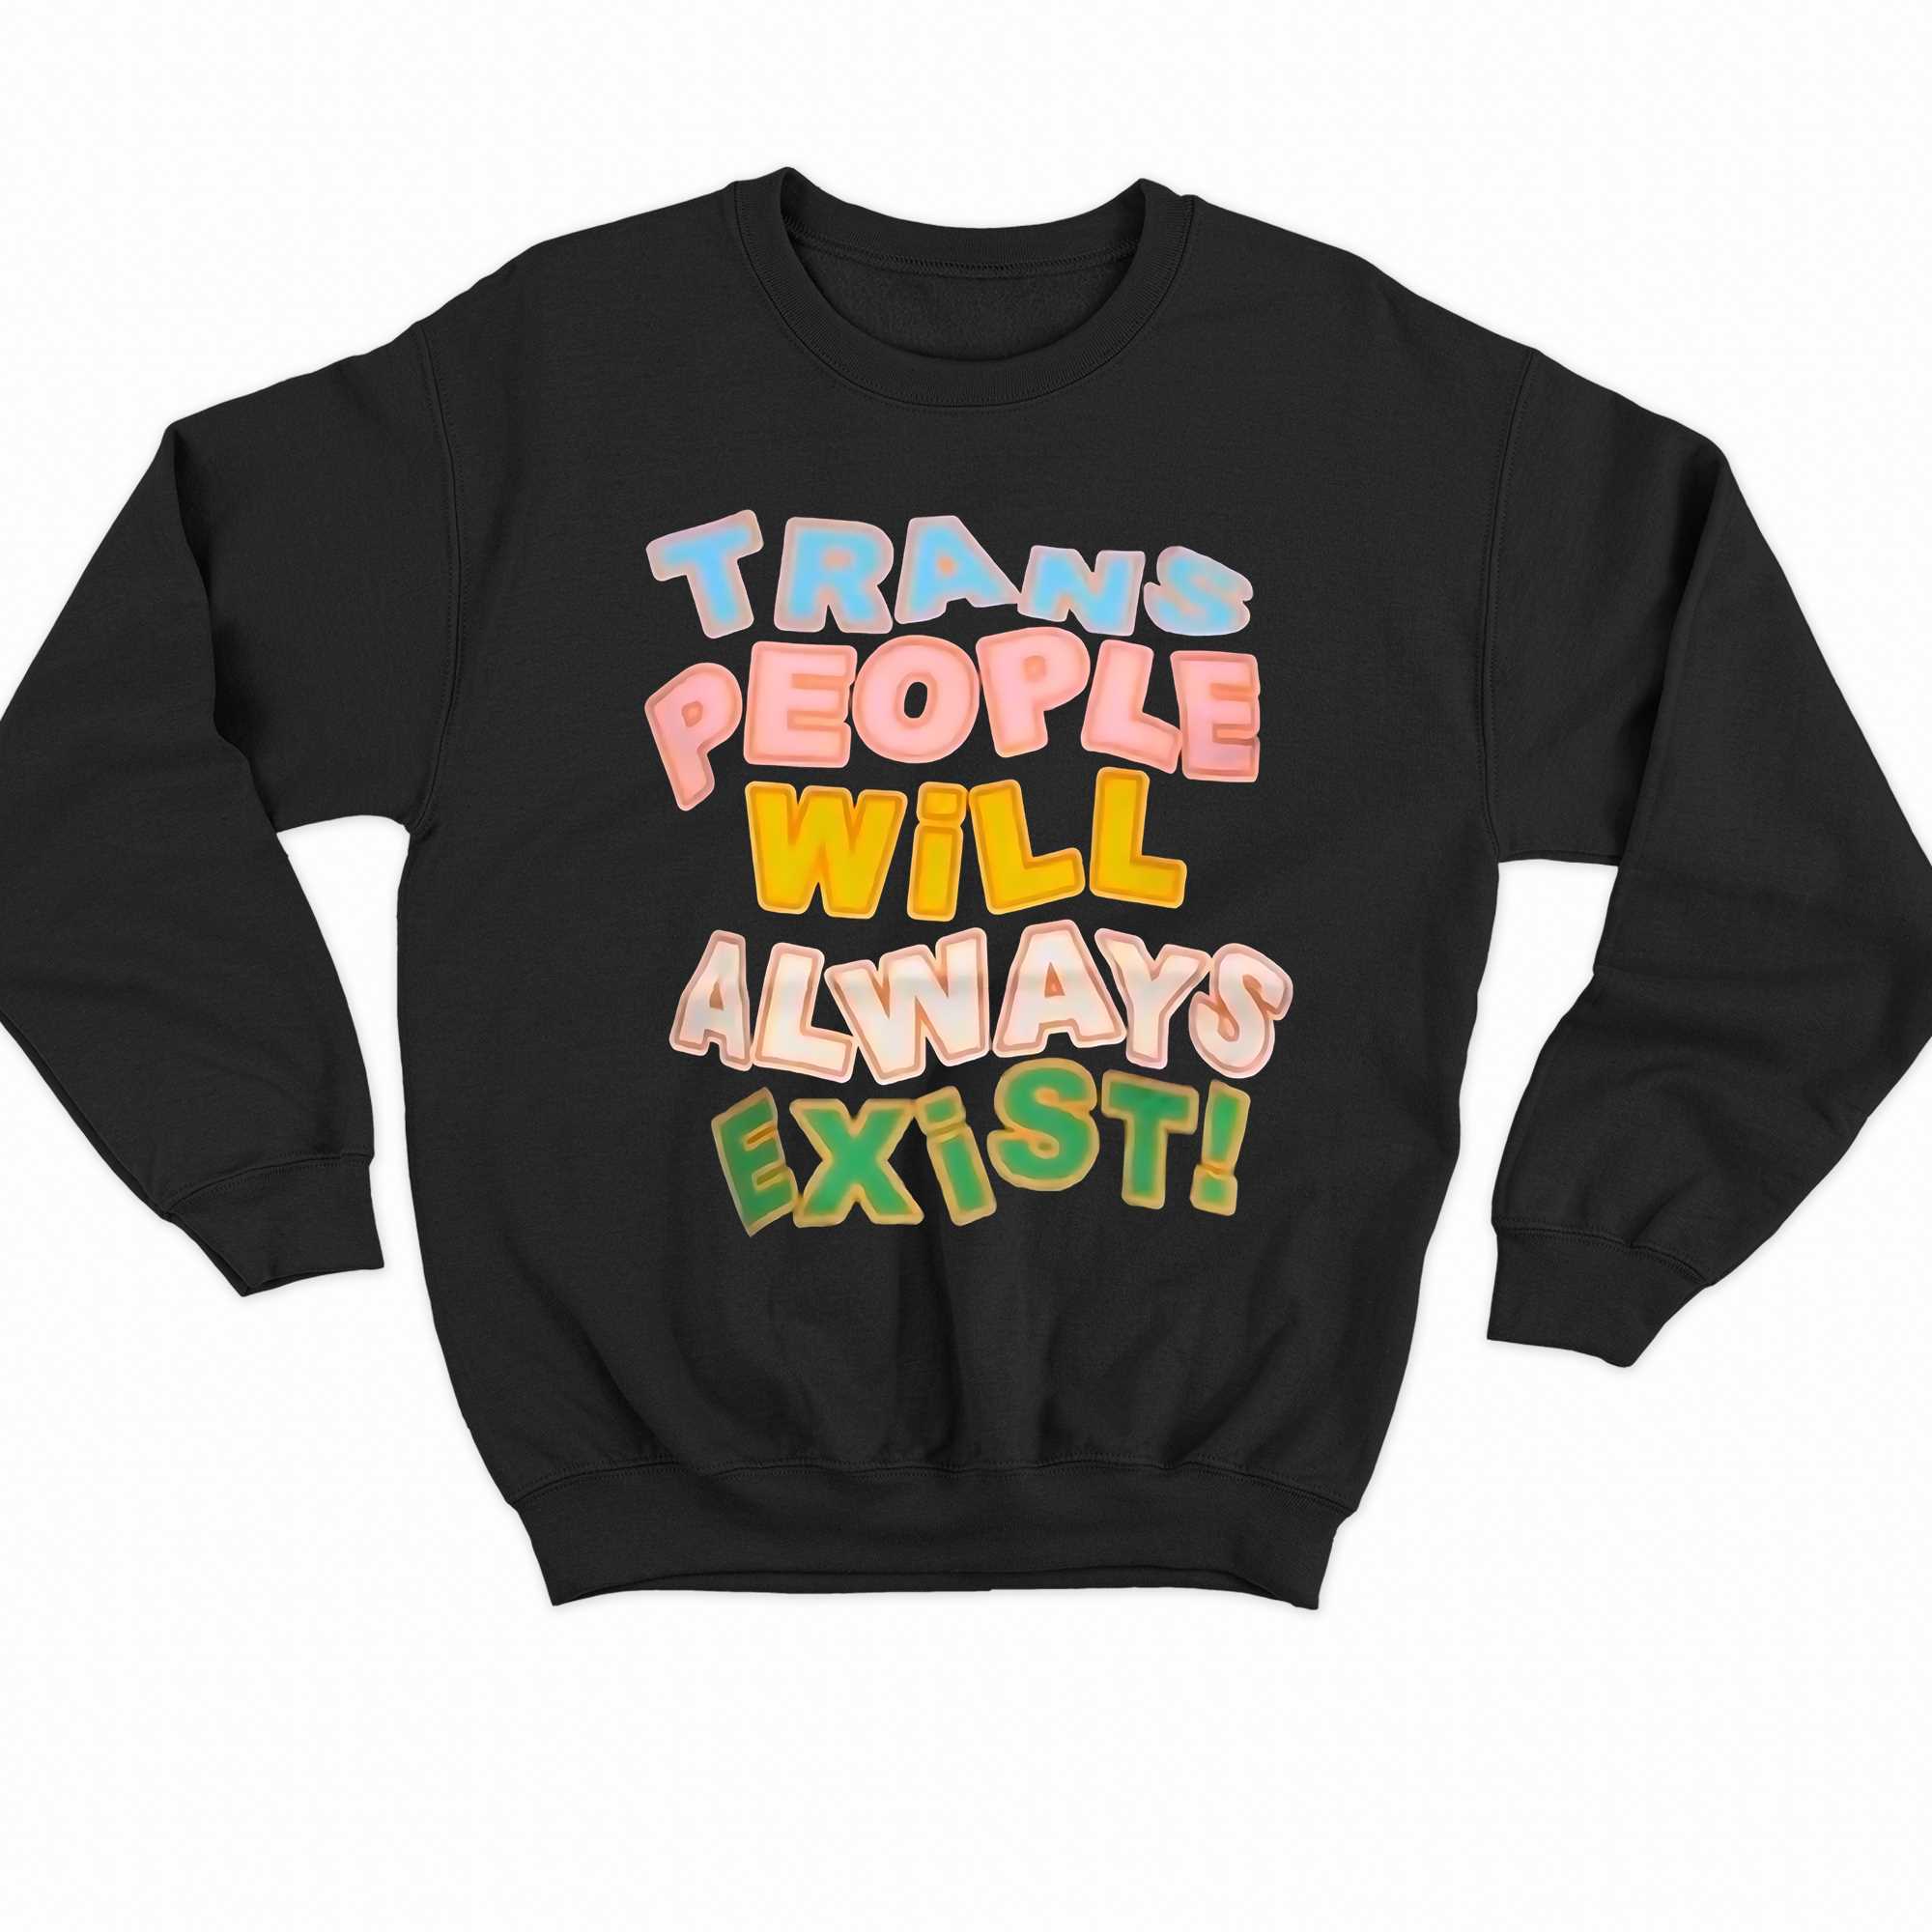 Trans People Will Always Exist Shirt 